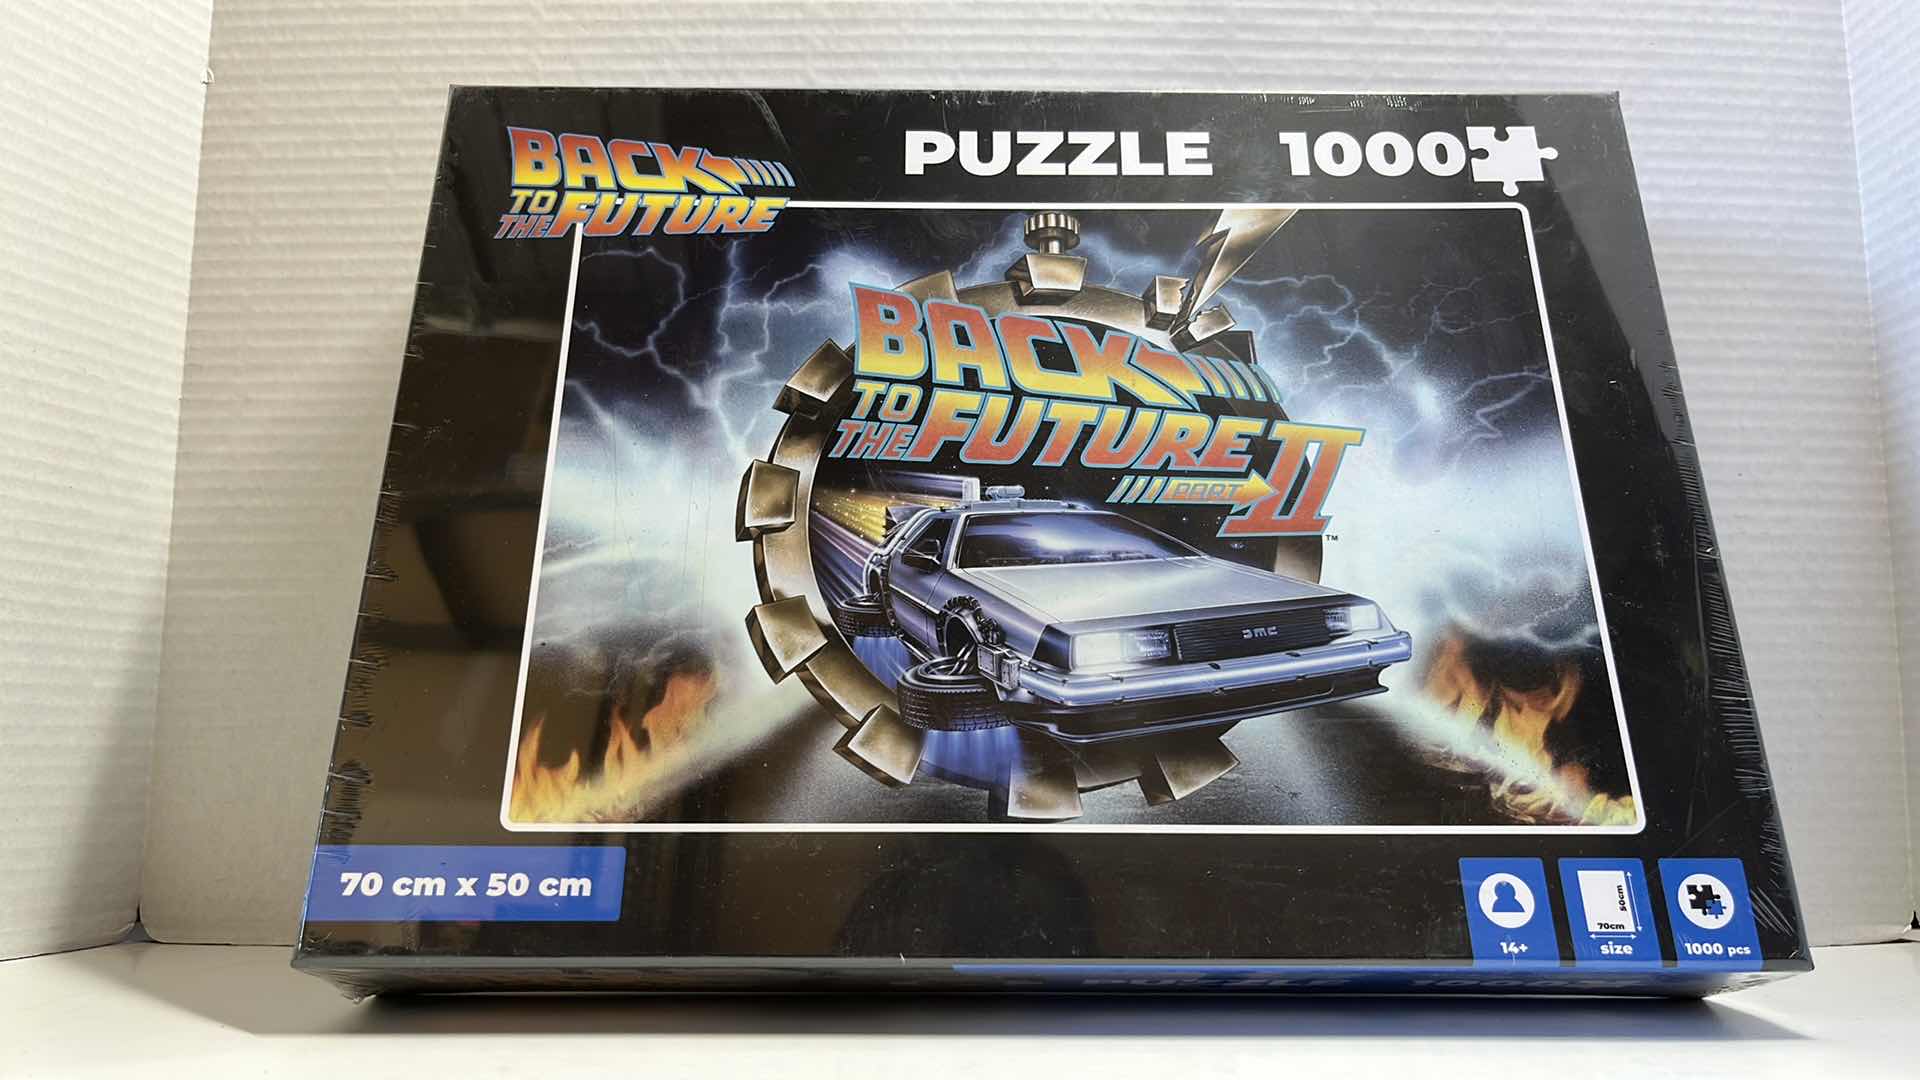 Photo 2 of NIB BACK TO THE FUTURE PART II 1000 PC JIGSAW PUZZLE & 1000 PC FRIENDS JIGSAW PUZZLE (2)